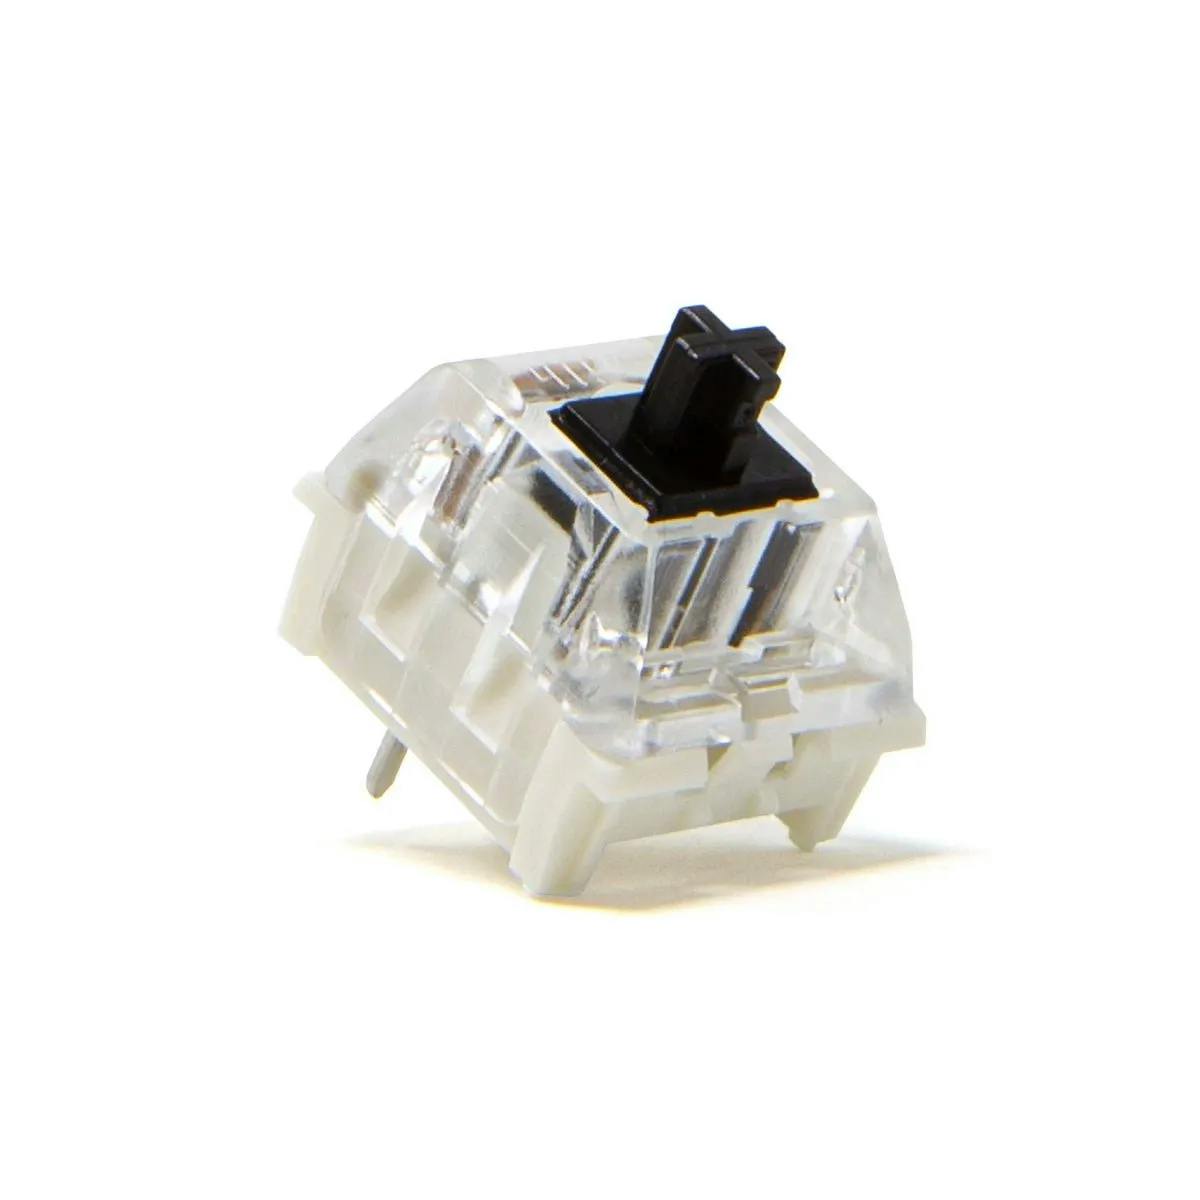 Image for Kailh Black Linear Switches (Original Stem)